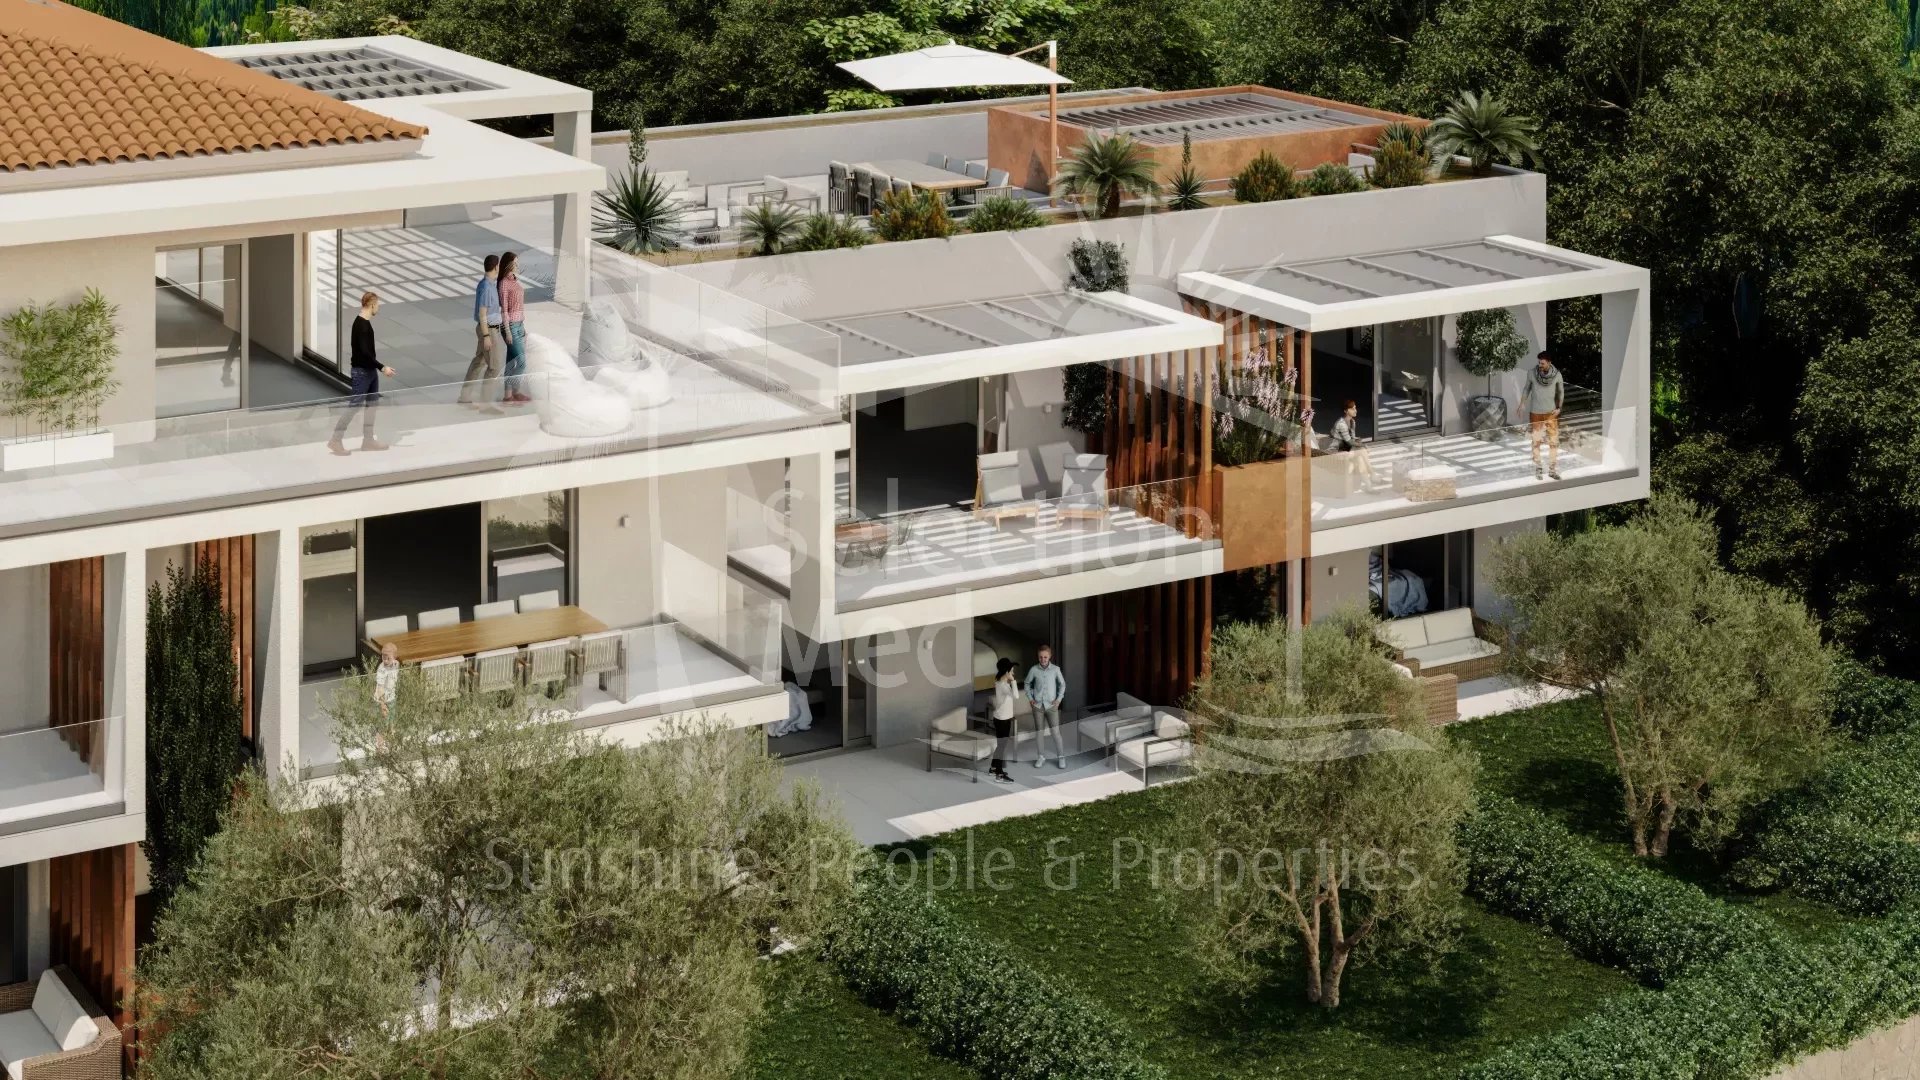 Biot, Panoramic views in new contemporary Residence " Les Terrasses des Vergers"